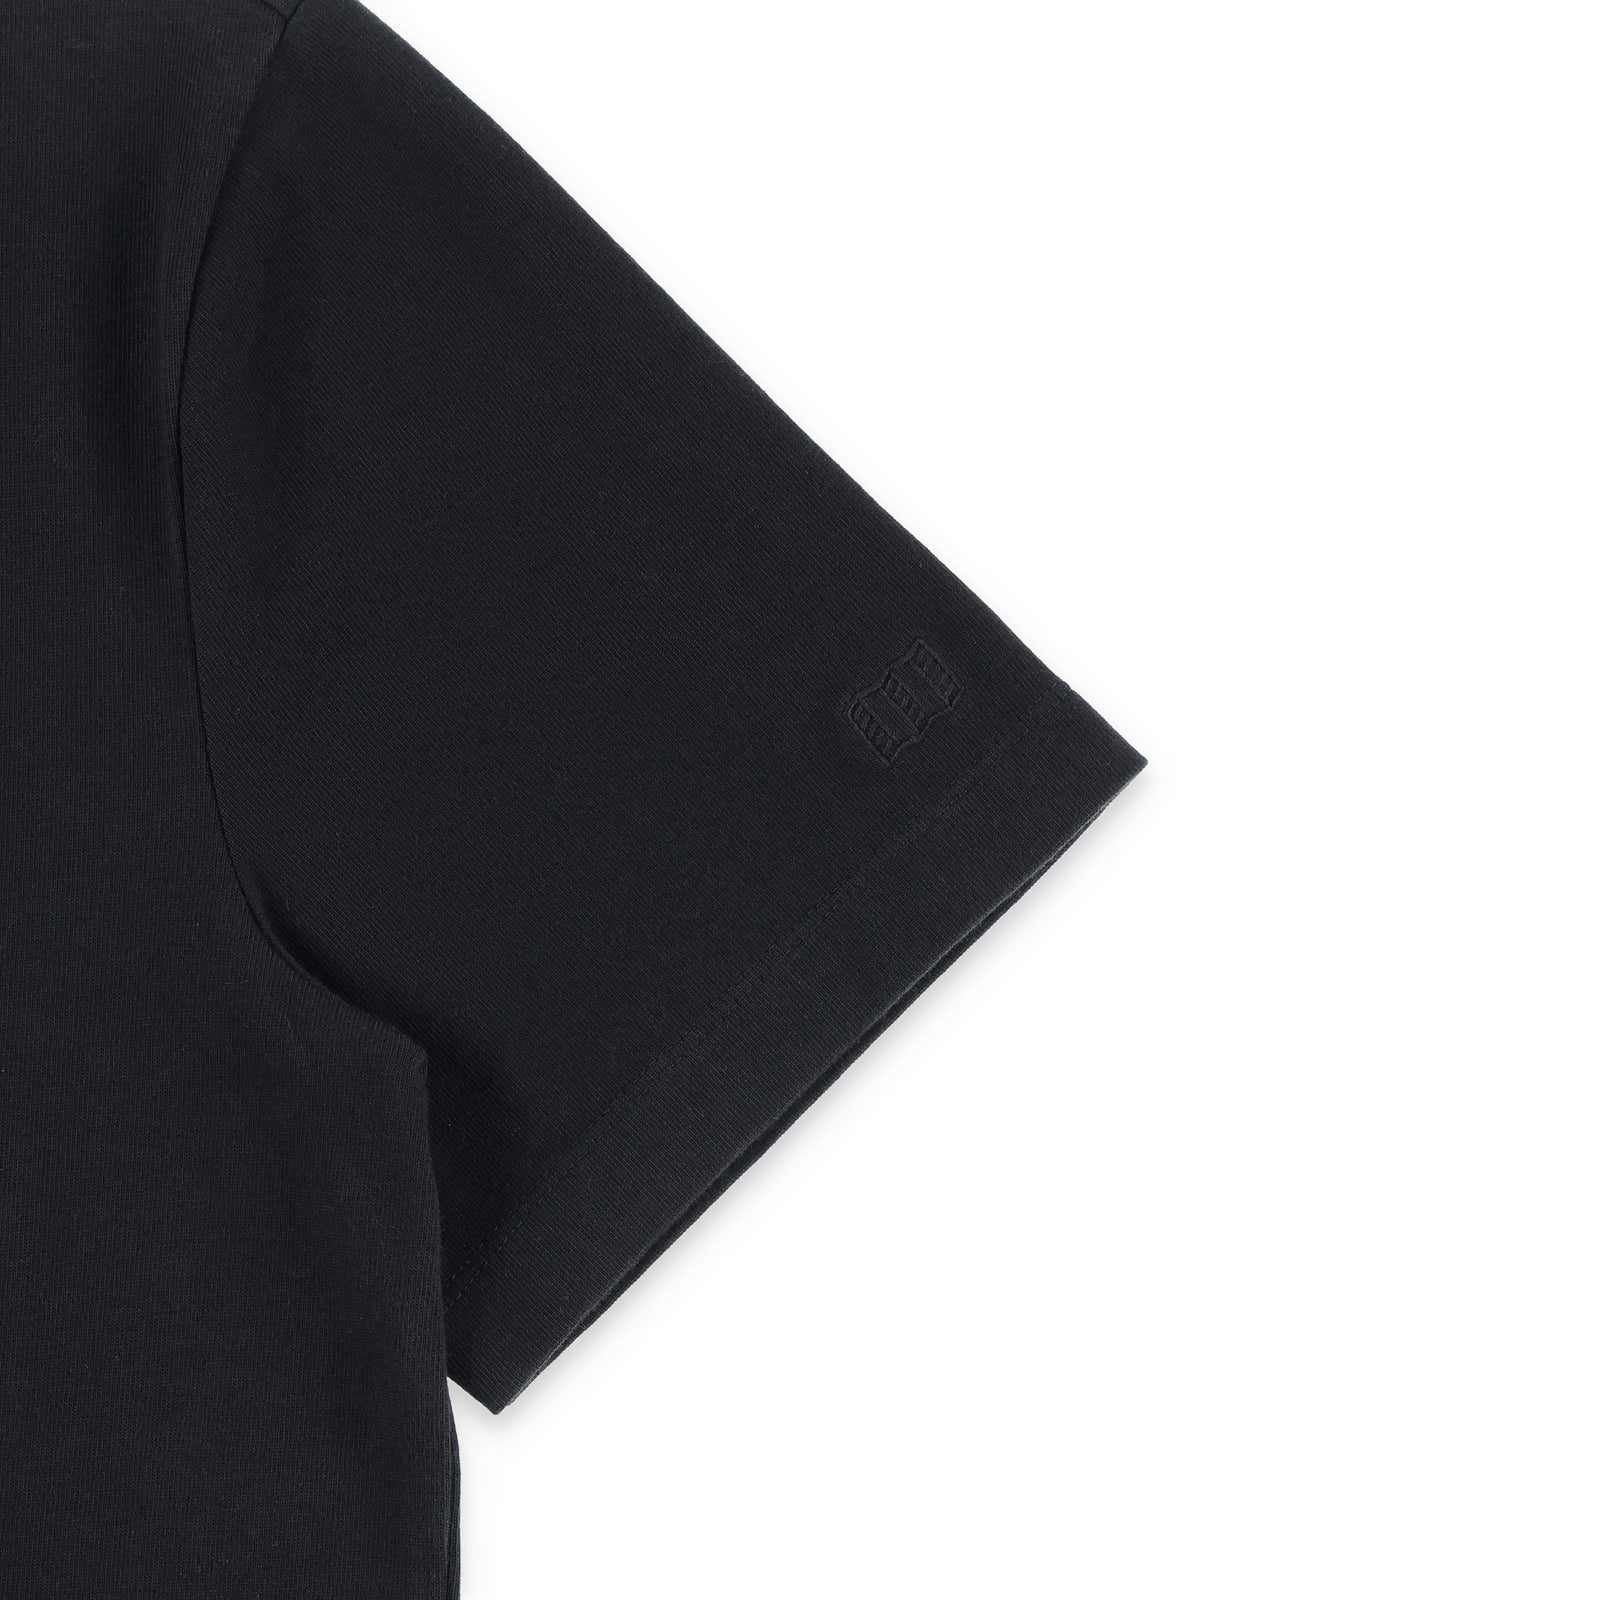 General detail shot of embroidered map logo on sleeve of Topo Designs Men's Dirt Pocket Tee 100% organic cotton short sleeve t-shirt in "black"